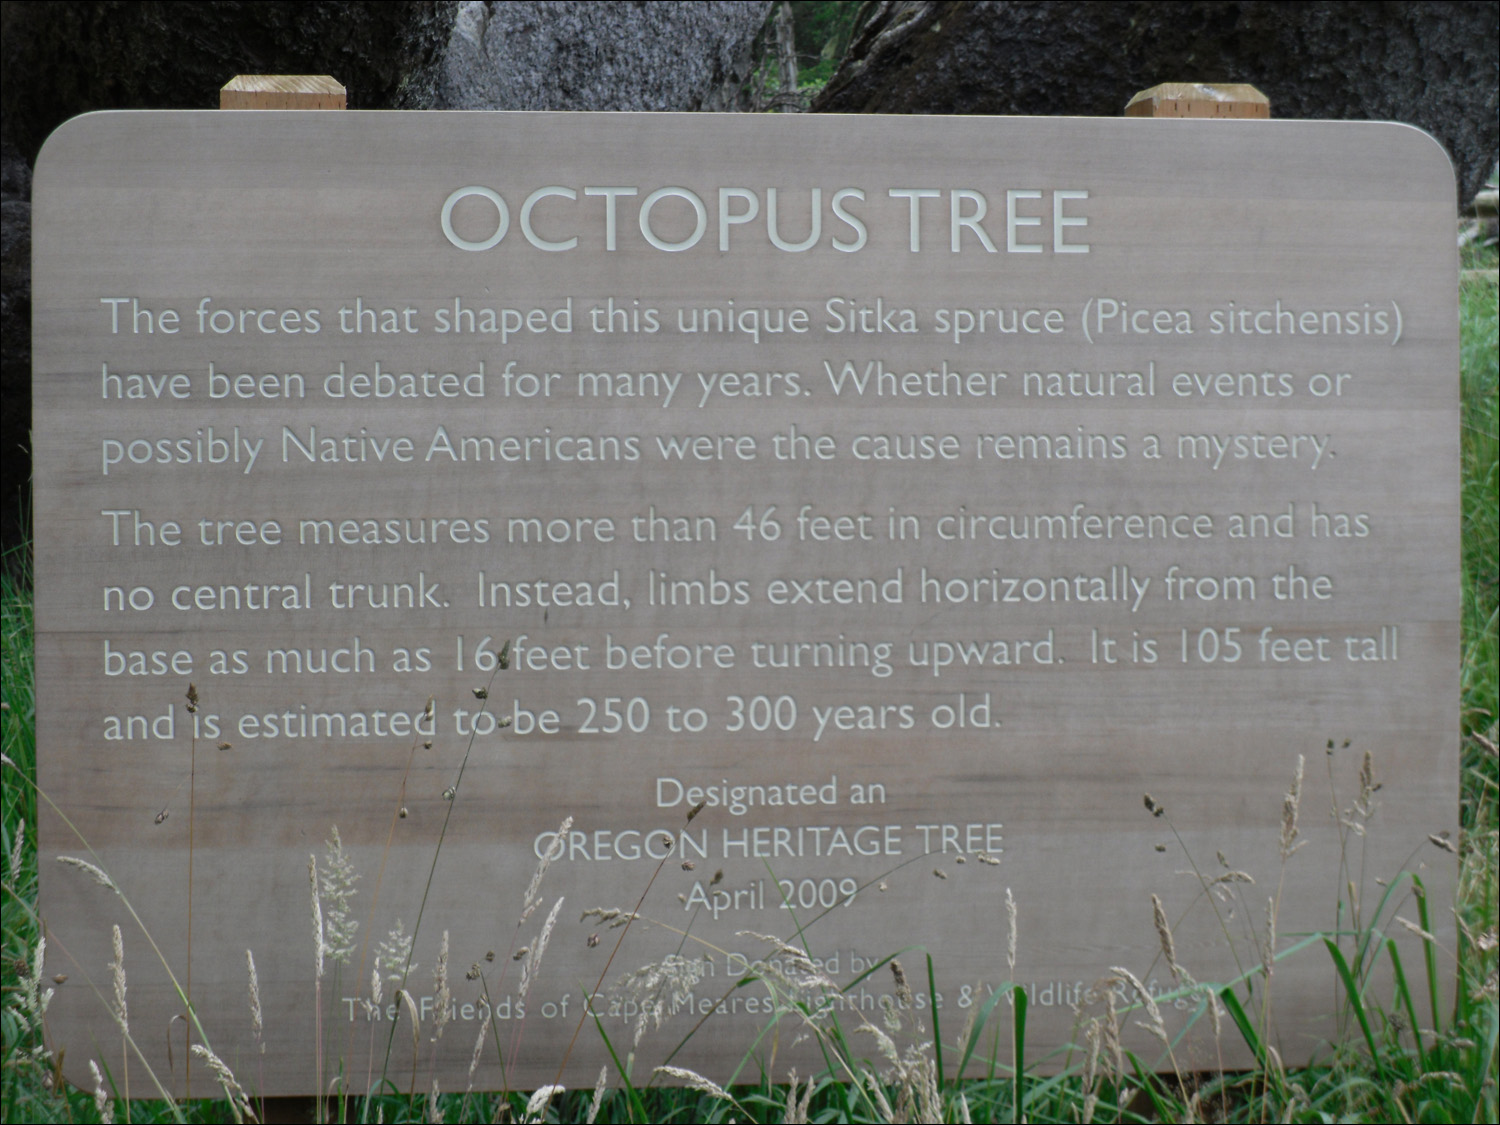 Tillamook, OR- Photos taken @Cape Mears State Park~ Octopus Tree info